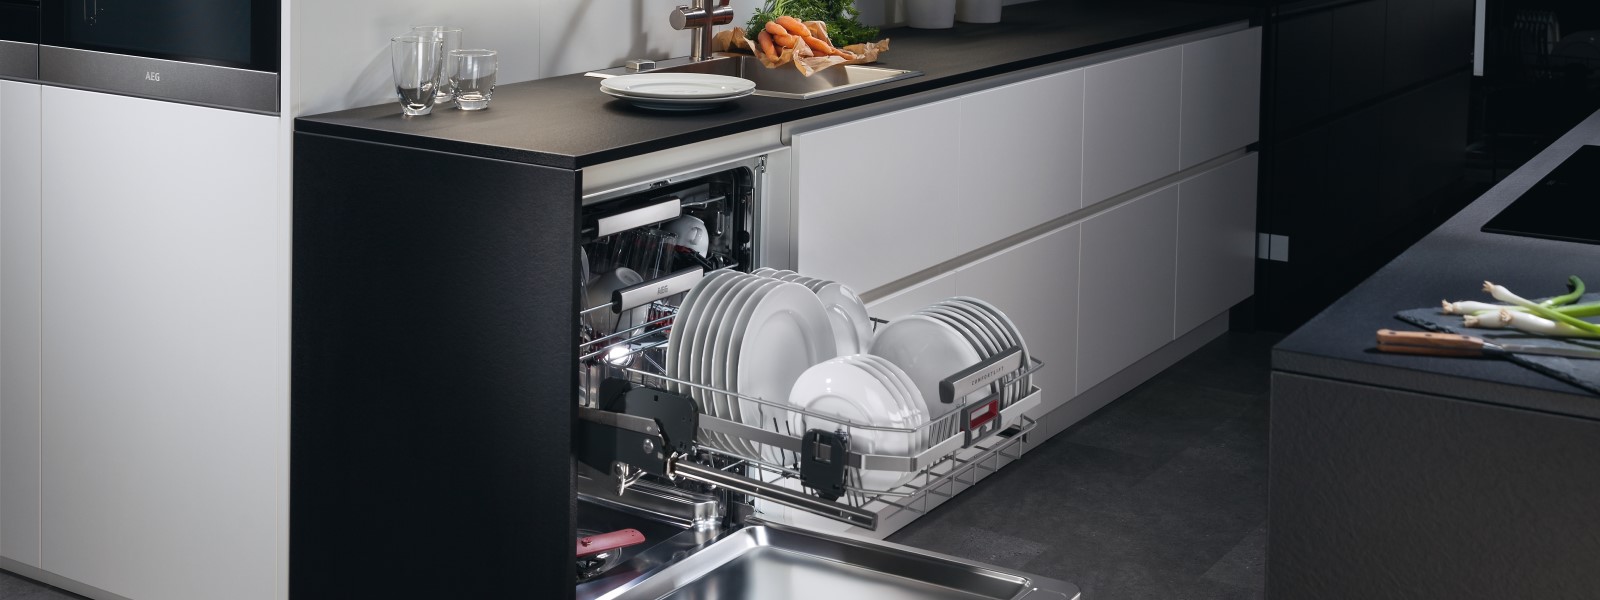 Save Up To $200* On Selected AEG Dishwashers at Hart & Co